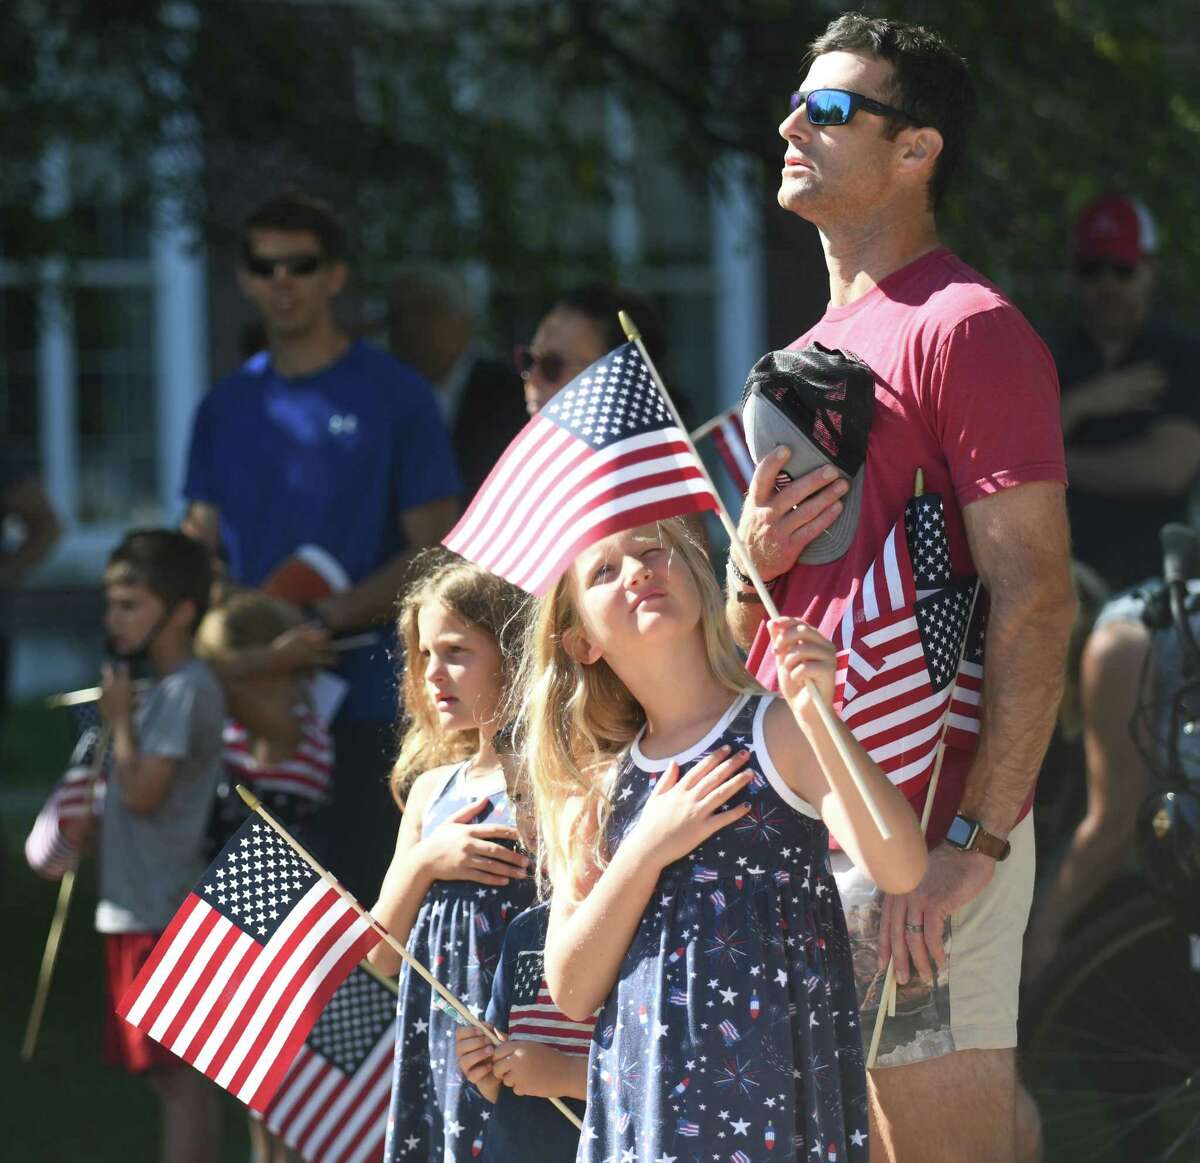 Greenwich's Sage Withrow and his children Ainsley, left, 6, Colt, center, 4, and Reagan, 8, look toward the flag during the singing of the Star Spangled Banner at the Fourth of July Celebration at Greenwich Town Hall in Greenwich, Conn. Monday, July 4, 2022. Presented by the Independence Day Association of Greenwich, the ceremony featured various readings and songs, a raising of the Colonial flag, recognition of the original Greenwich settlers, and reading of the names of Greenwich soldiers killed in the Revolutionary War.